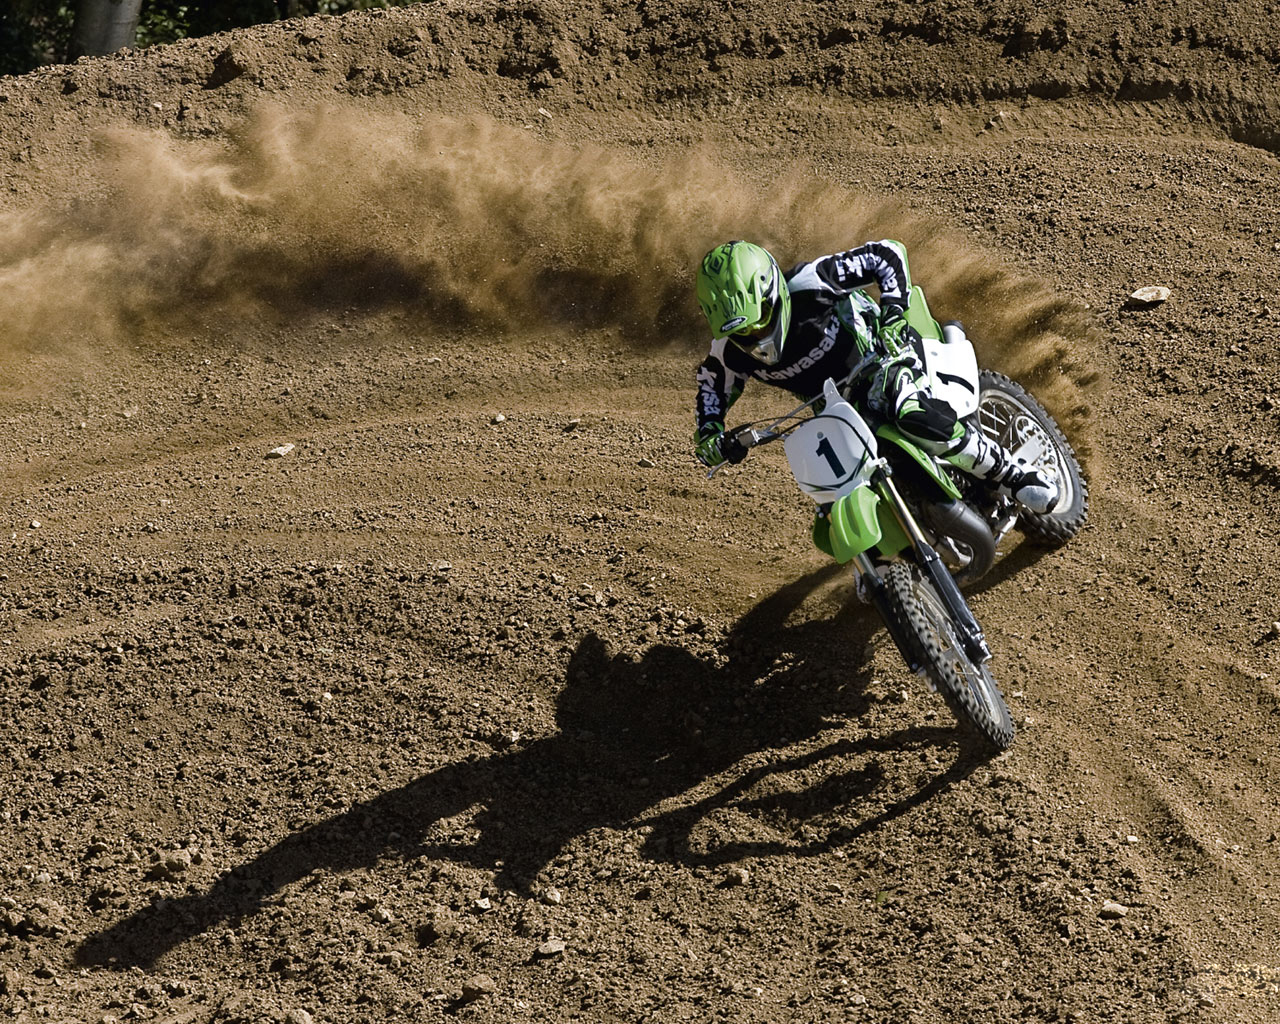 Download High quality Motocross wallpaper / Sports / 1280x1024